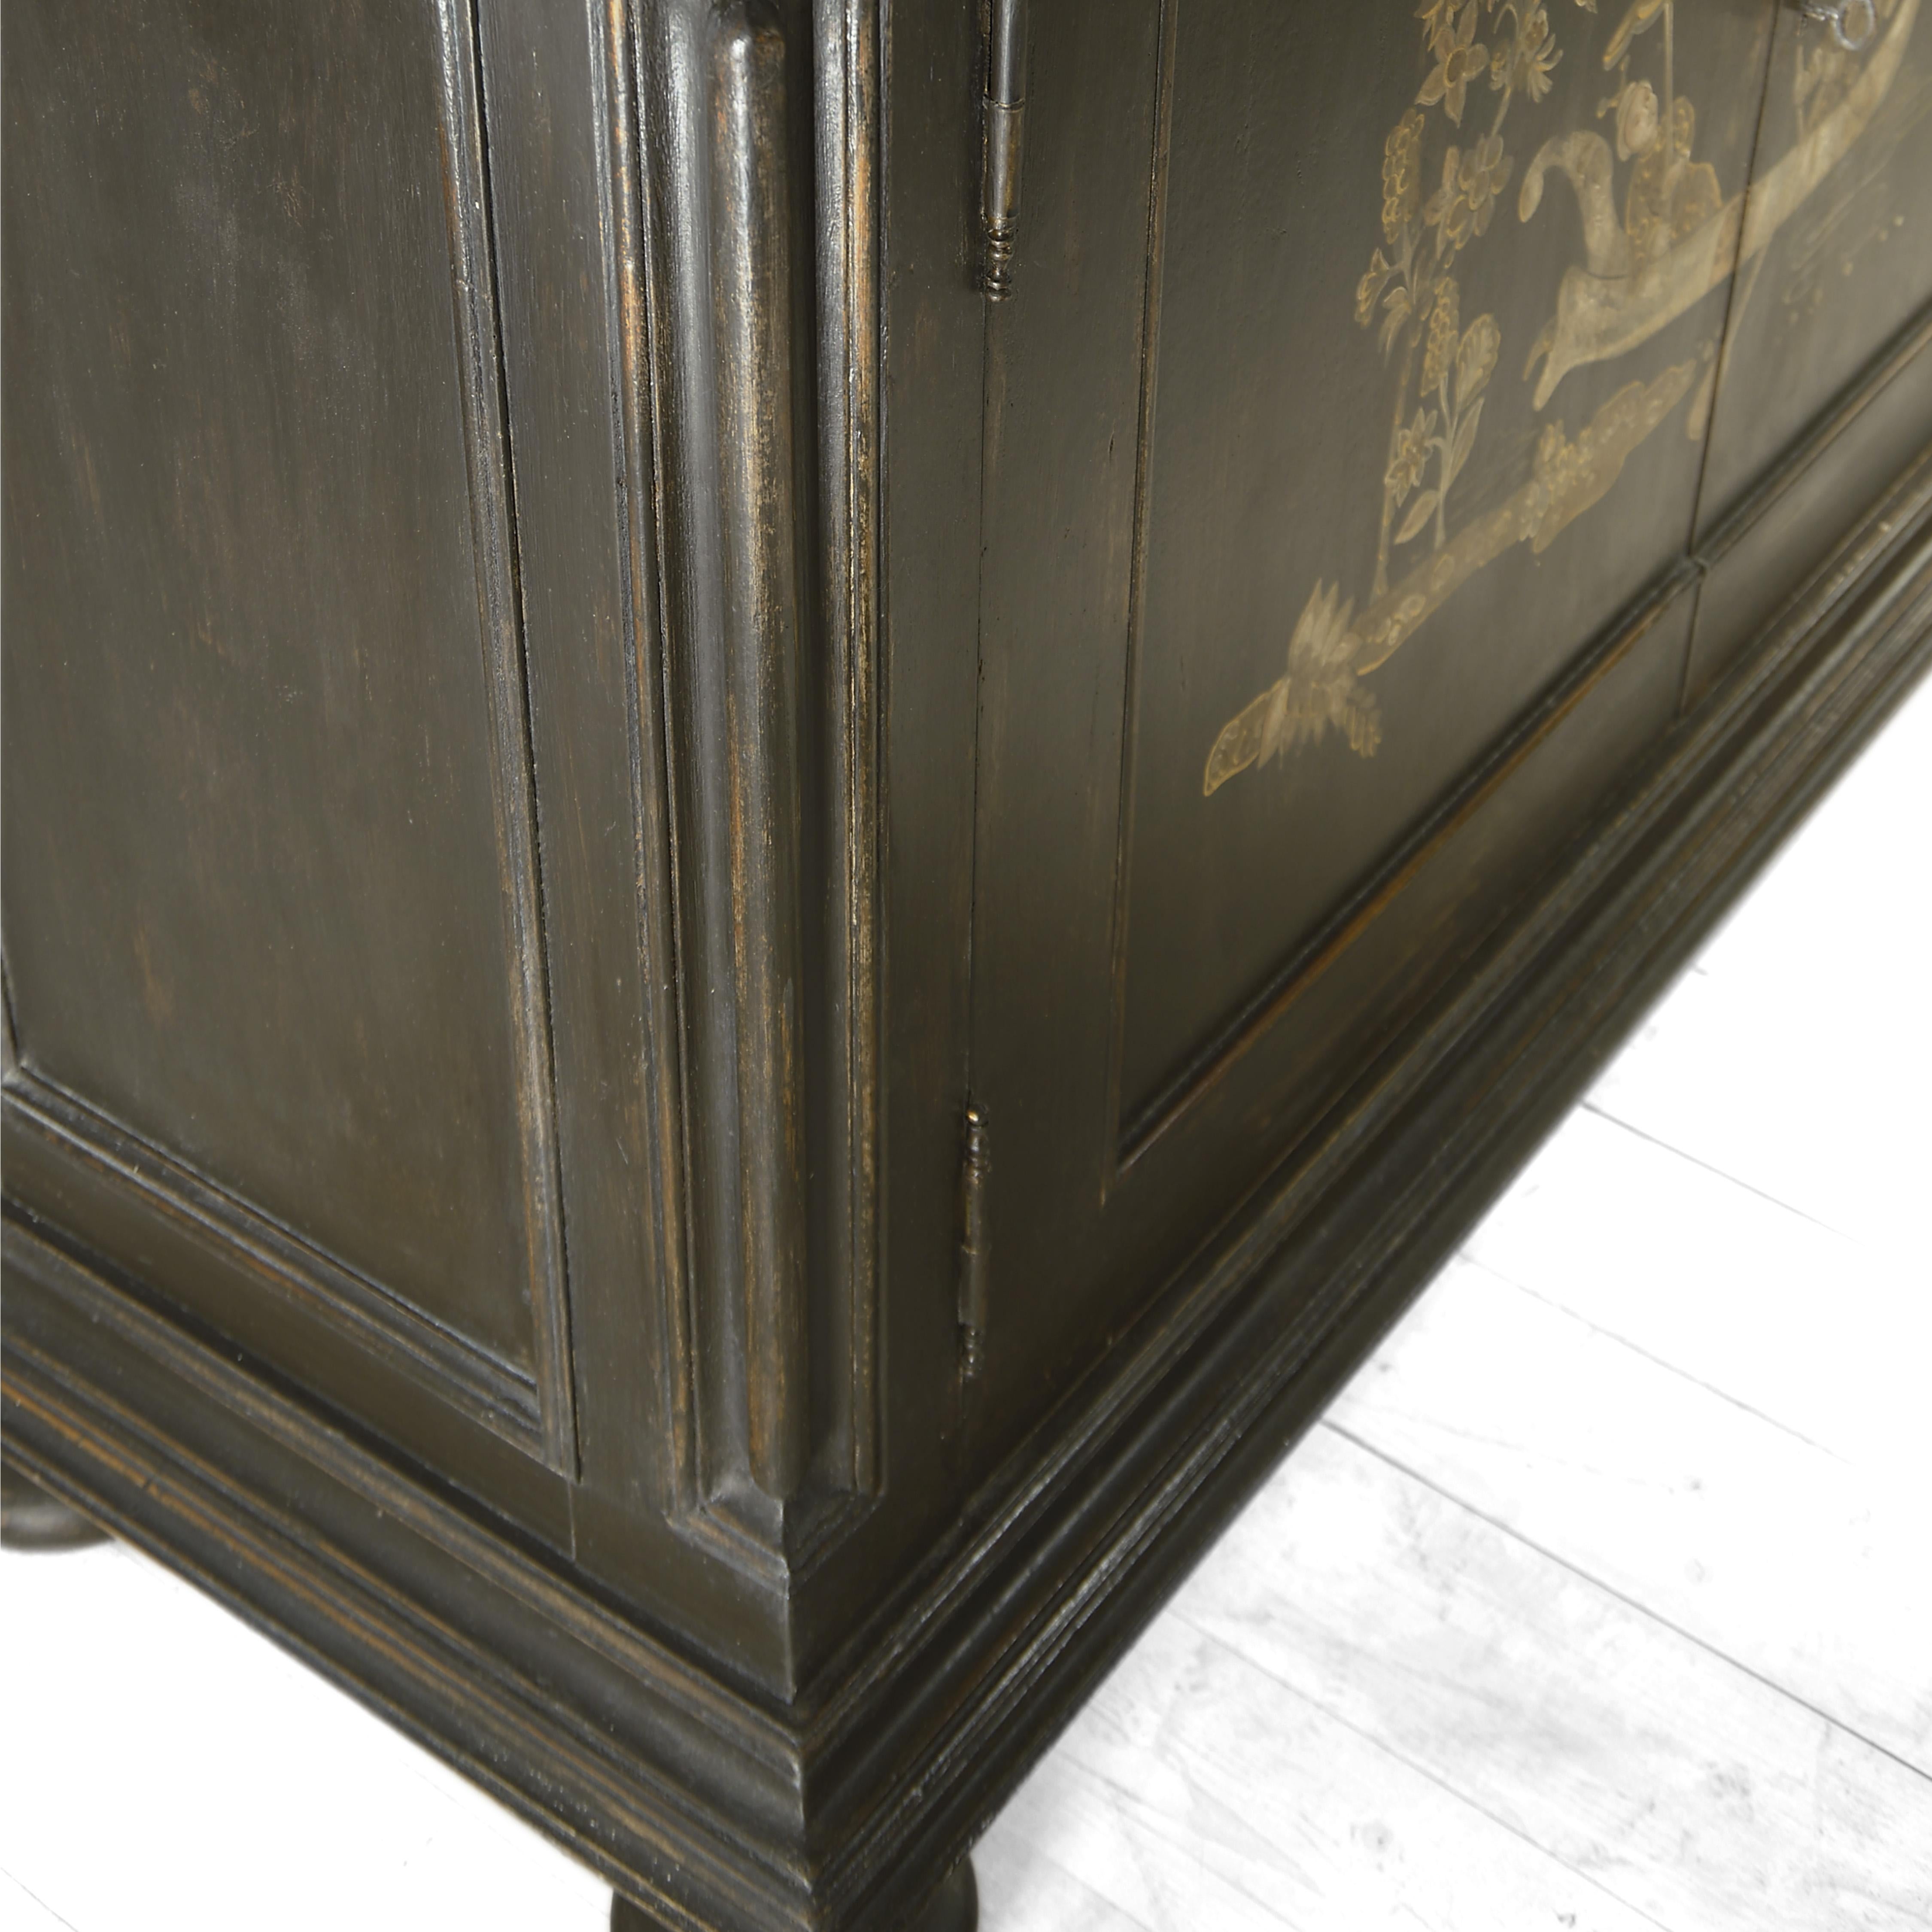 This sideboard has a balanced elegance and aged atmosphere in all spaces with this eye-catching two doors.

With its faded colors and classic molding, this furniture is brimming with antique inspiration.
It is the perfect piece for a timeless